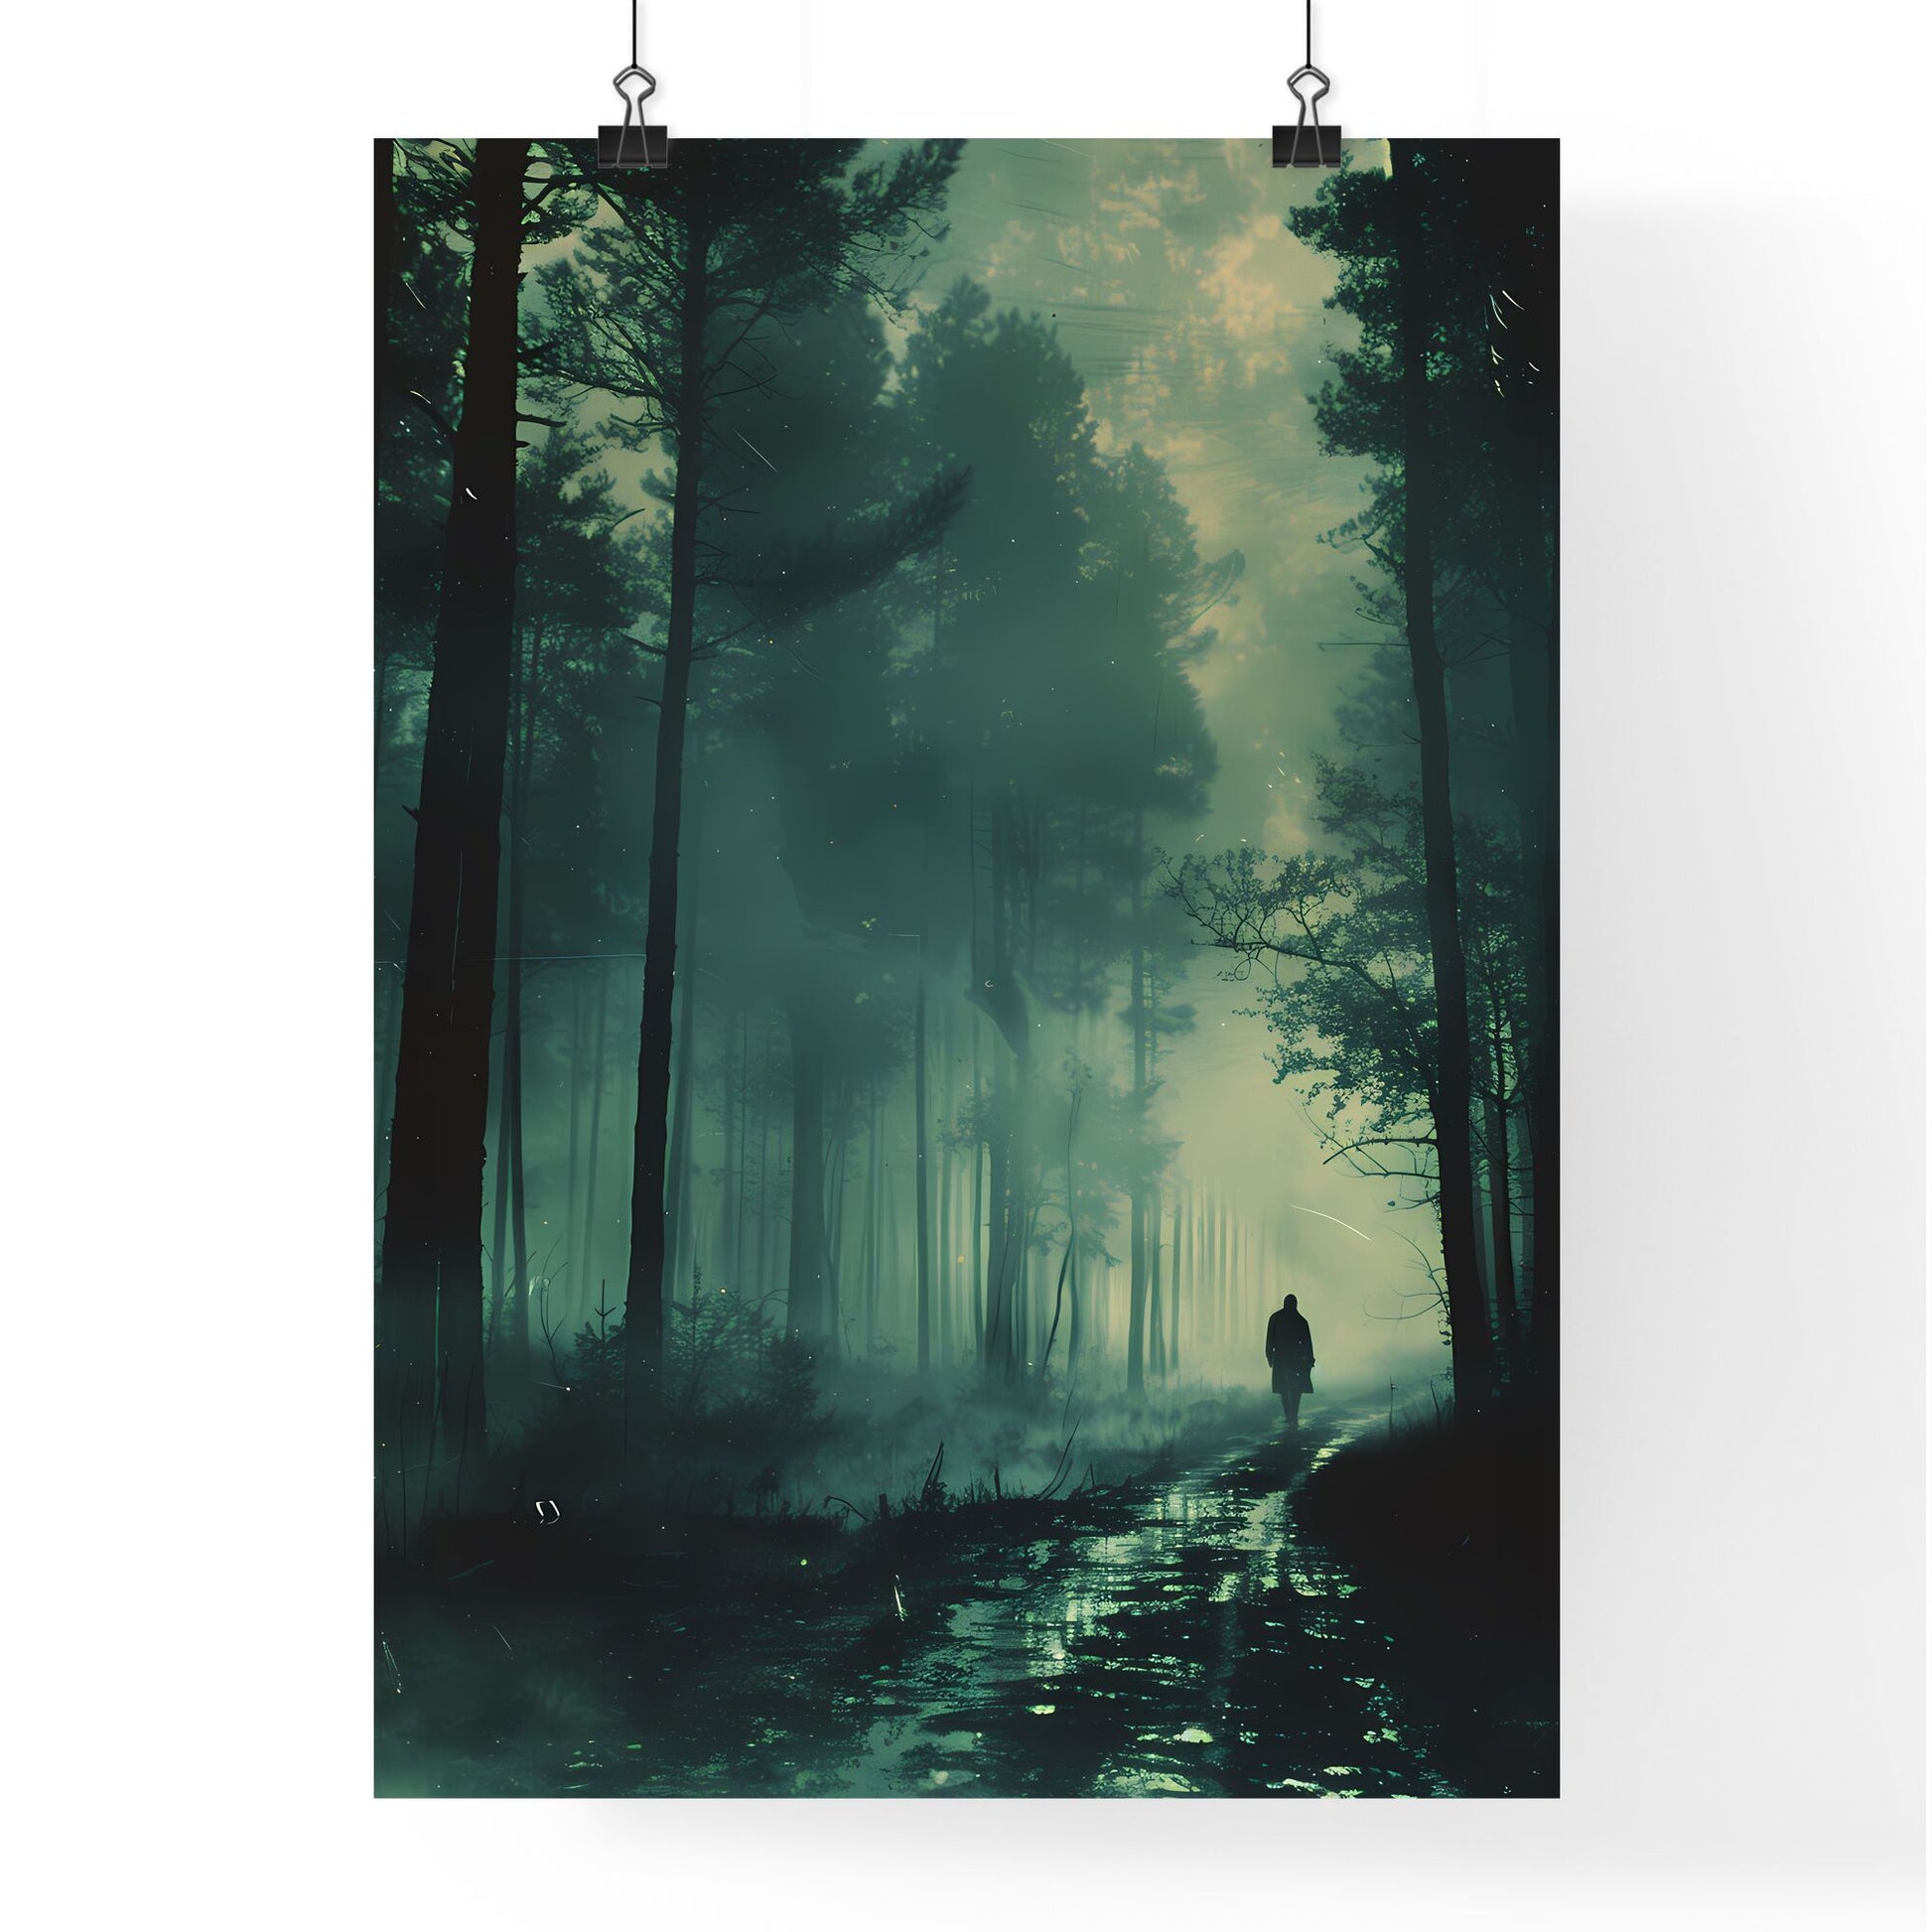 Surreal, Grainy VHS-Style Digital Painting of a Forest at Night with a Floating Figure Default Title